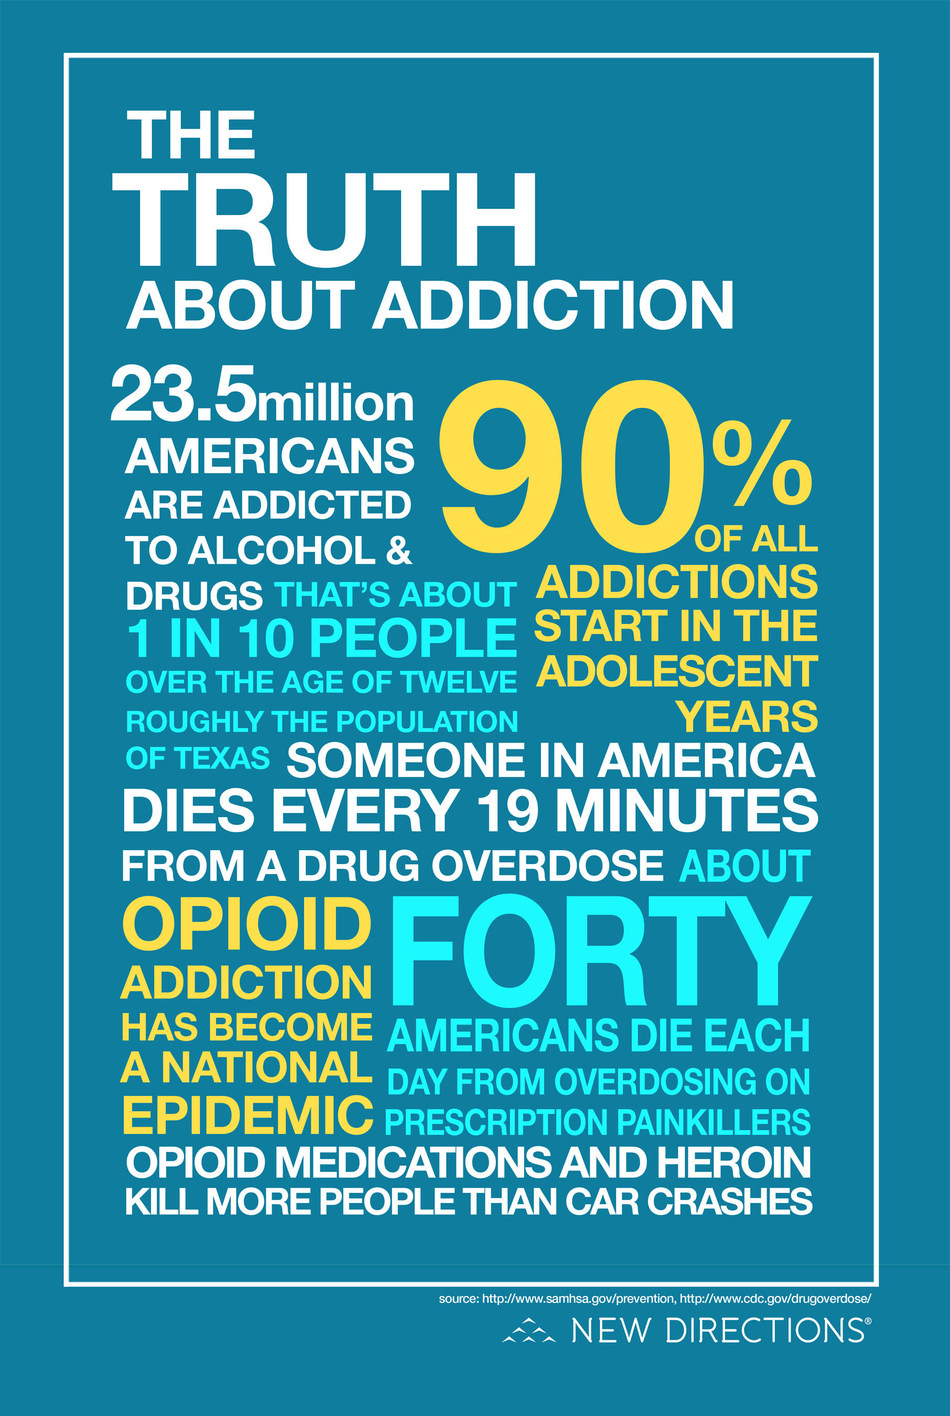 The Truth About Addiction